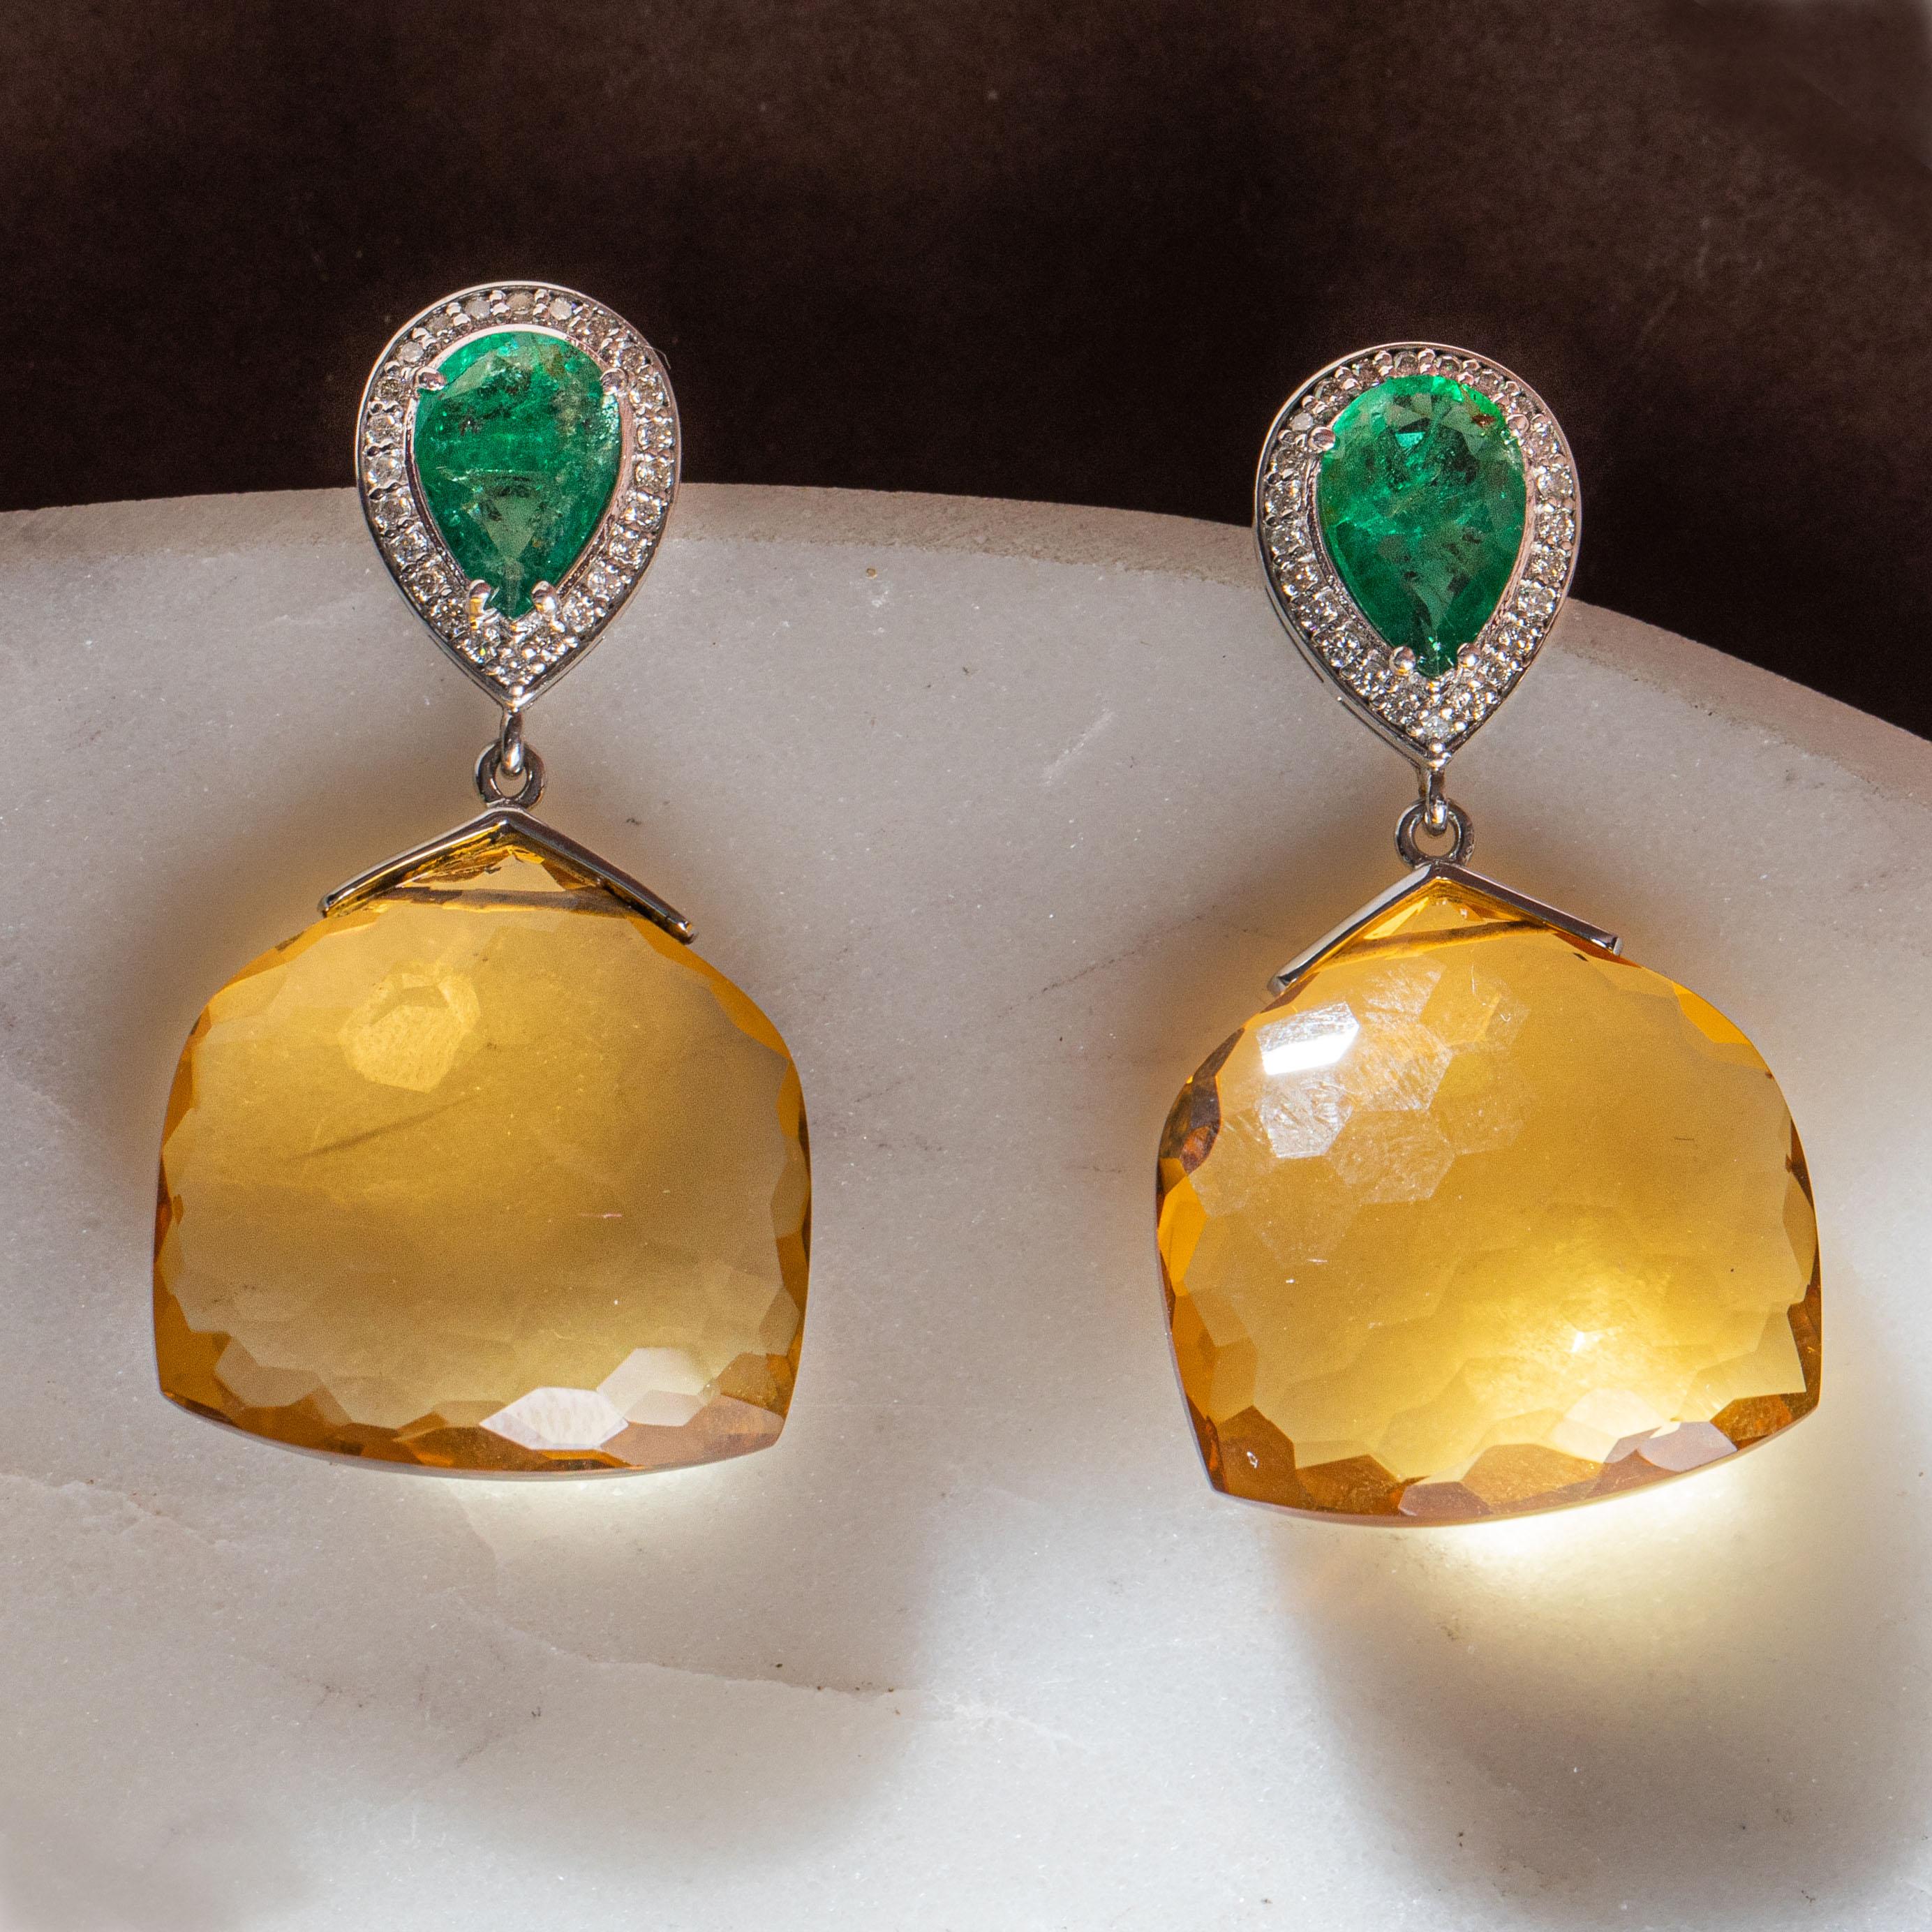 Feast your eyes on these vivid Citrine and Emerald Gemstone Dangle Earrings encircled by Natural Diamonds. The hook and suspension are made with pure 14K Yellow Gold. Pair yours with everything – these wonders can take you through day and night